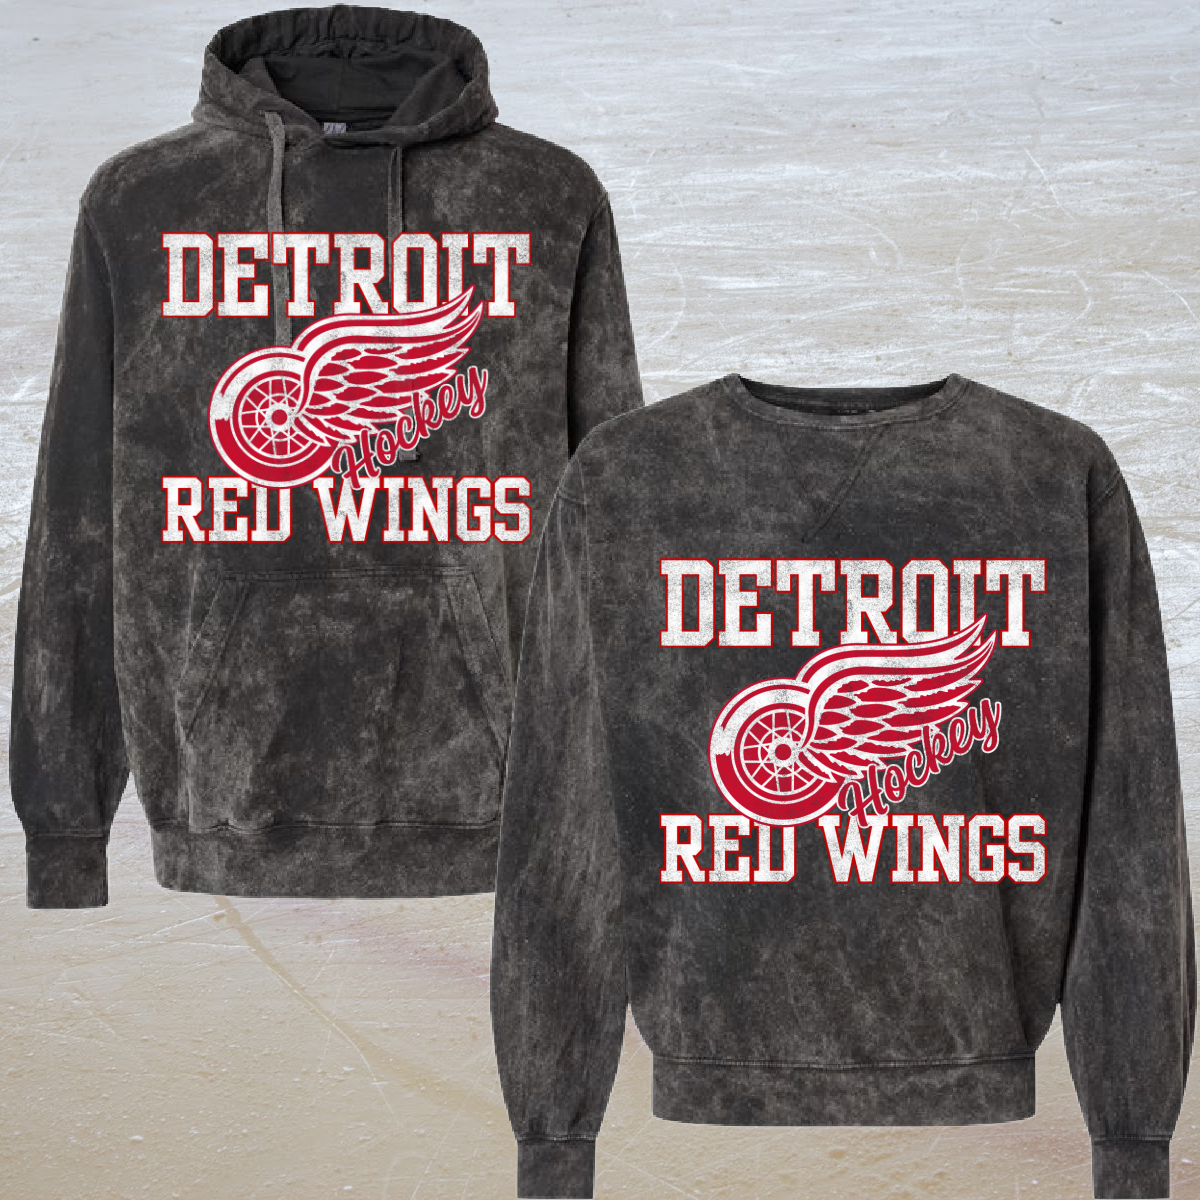 Distressed Hockey Mineral Washed Hoodie or Crewneck (Adult) - PREORDER - WILL SHIP BY 3/11